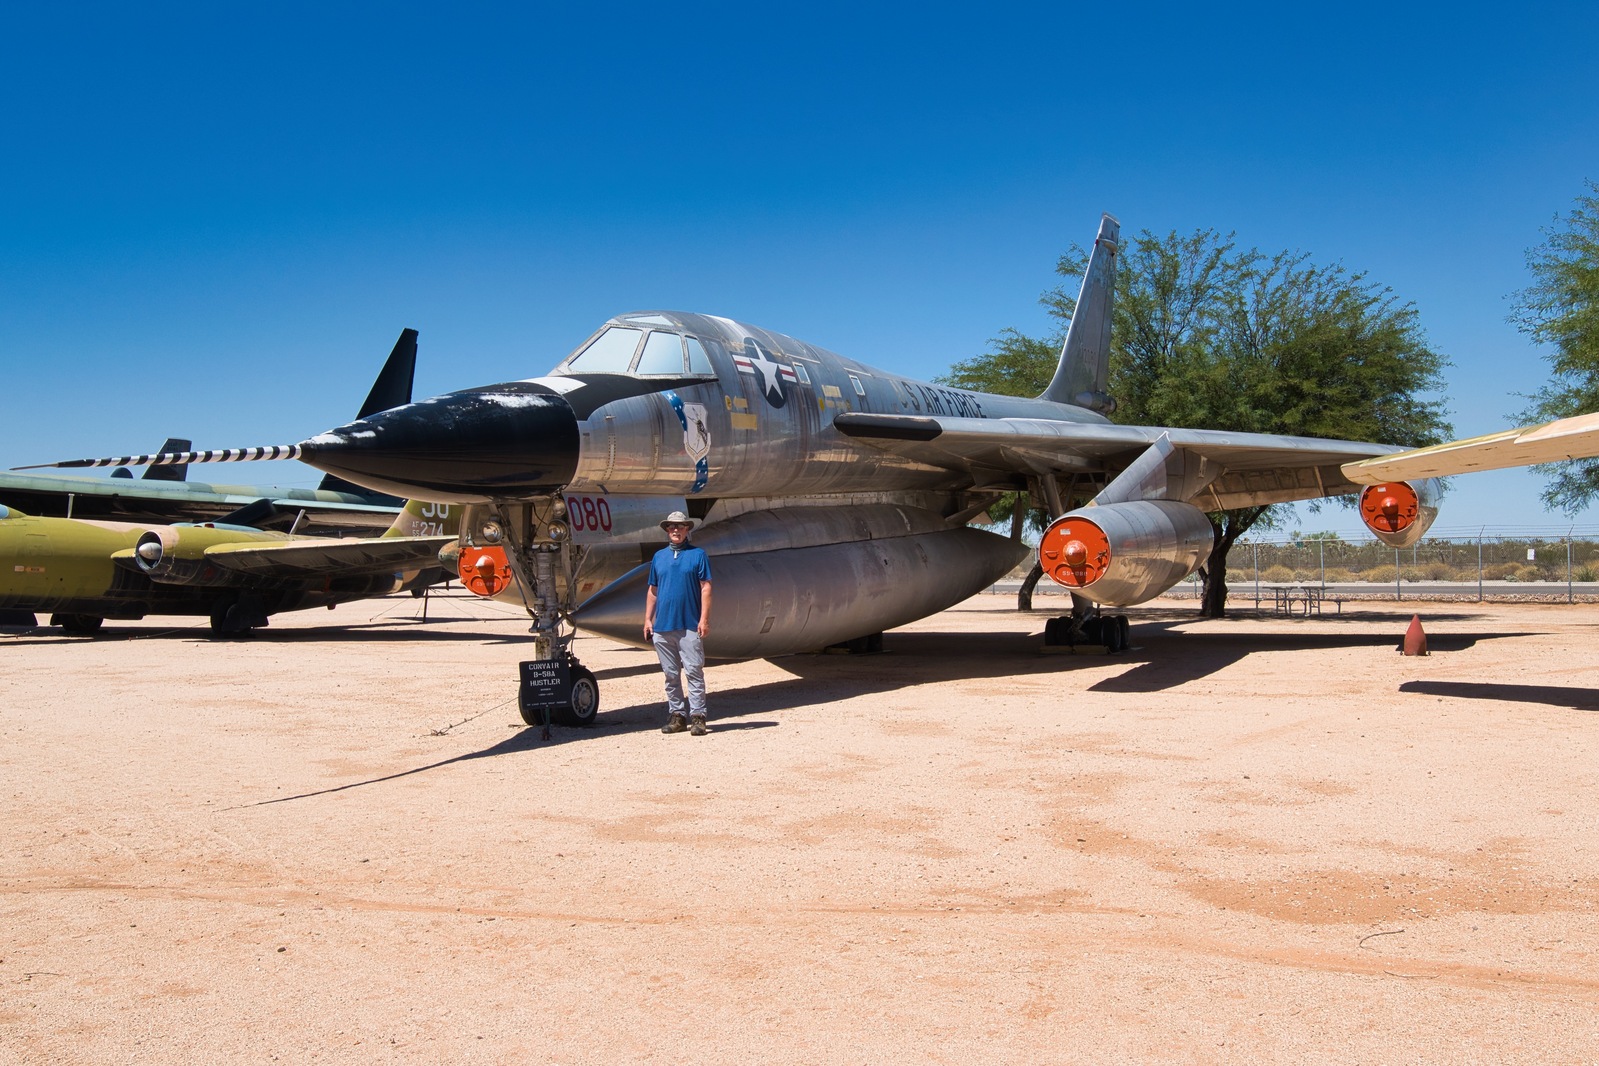 Image of Pima Air Museum by Steve West